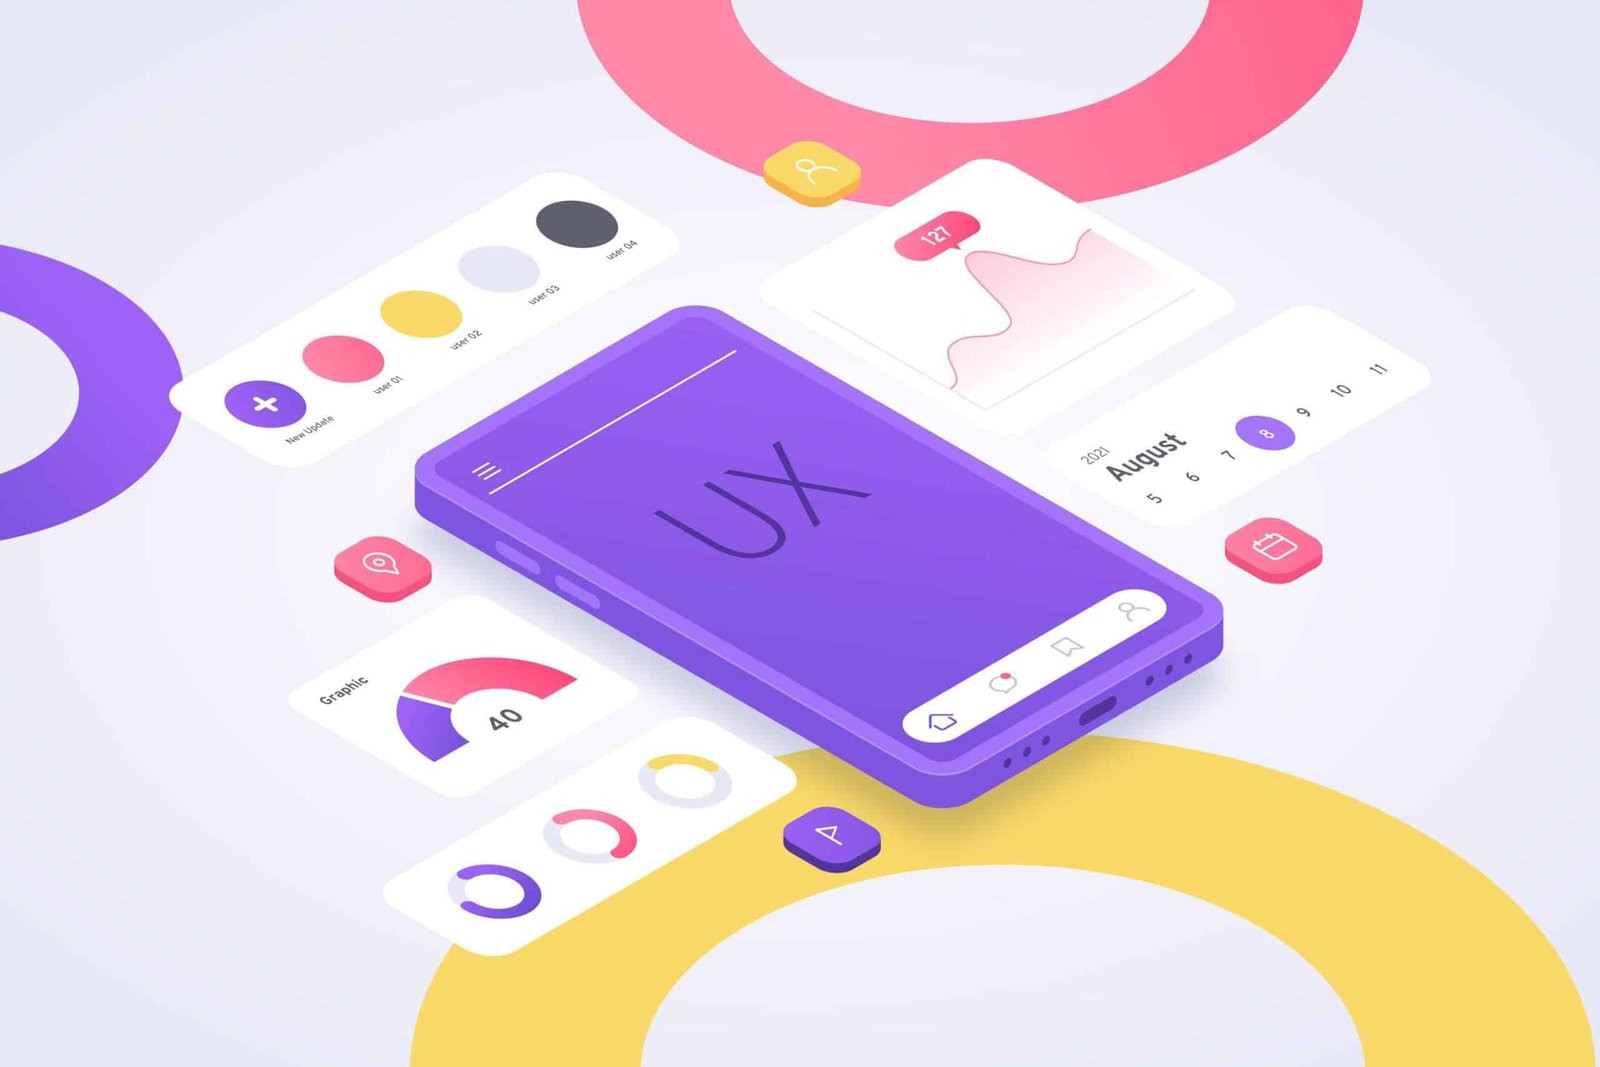 User Interface (UI) Design Trends for Apps